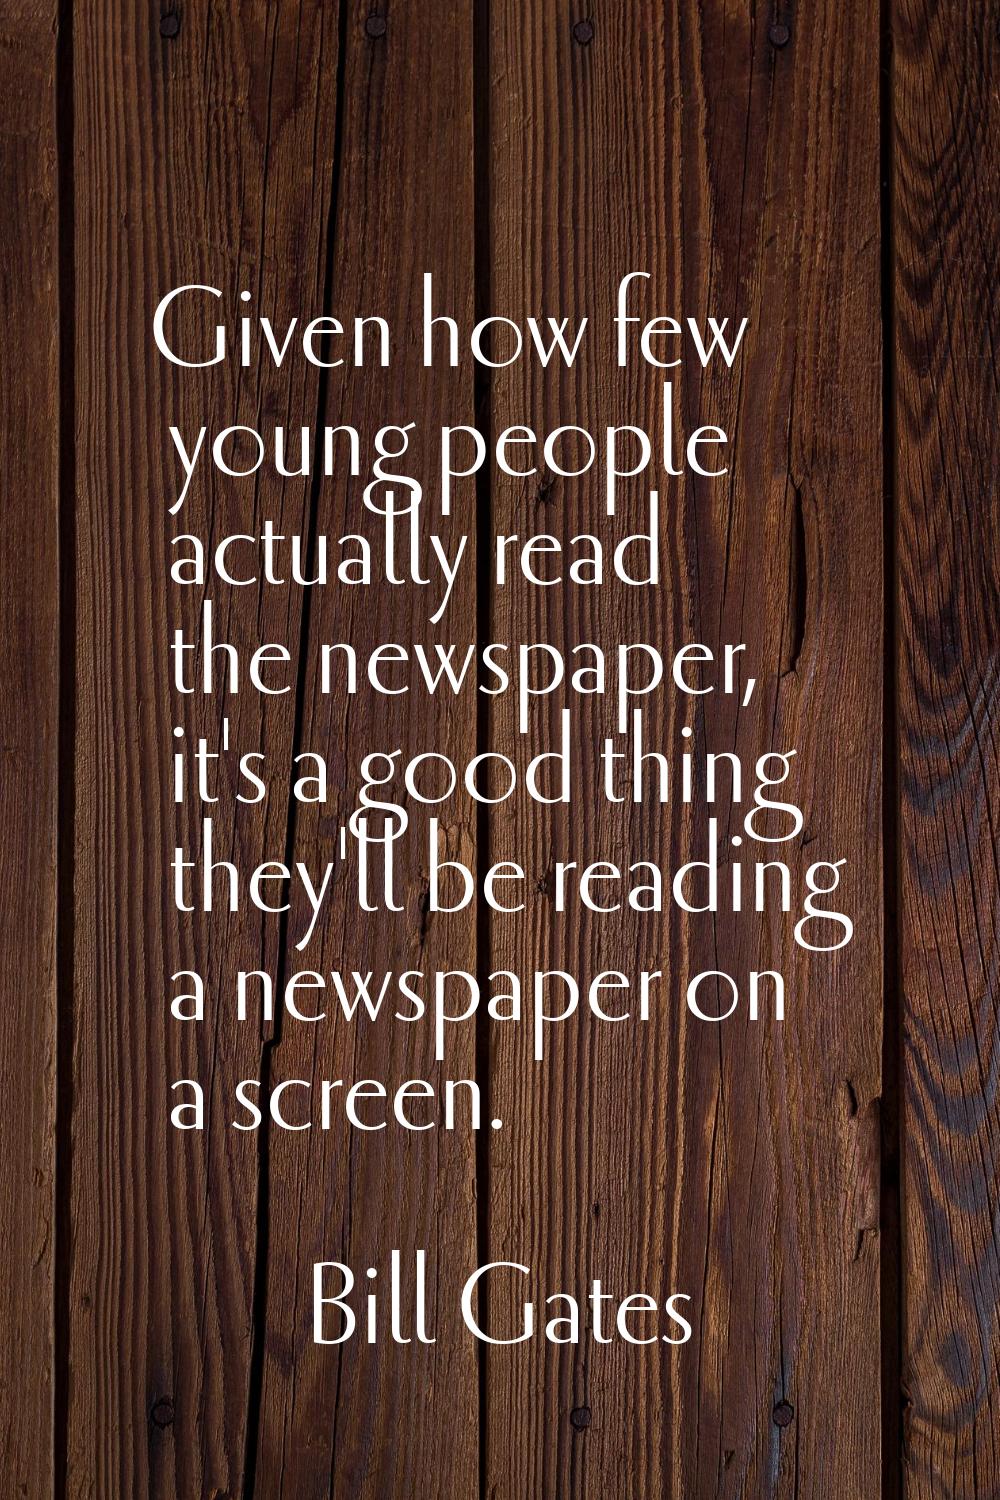 Given how few young people actually read the newspaper, it's a good thing they'll be reading a news